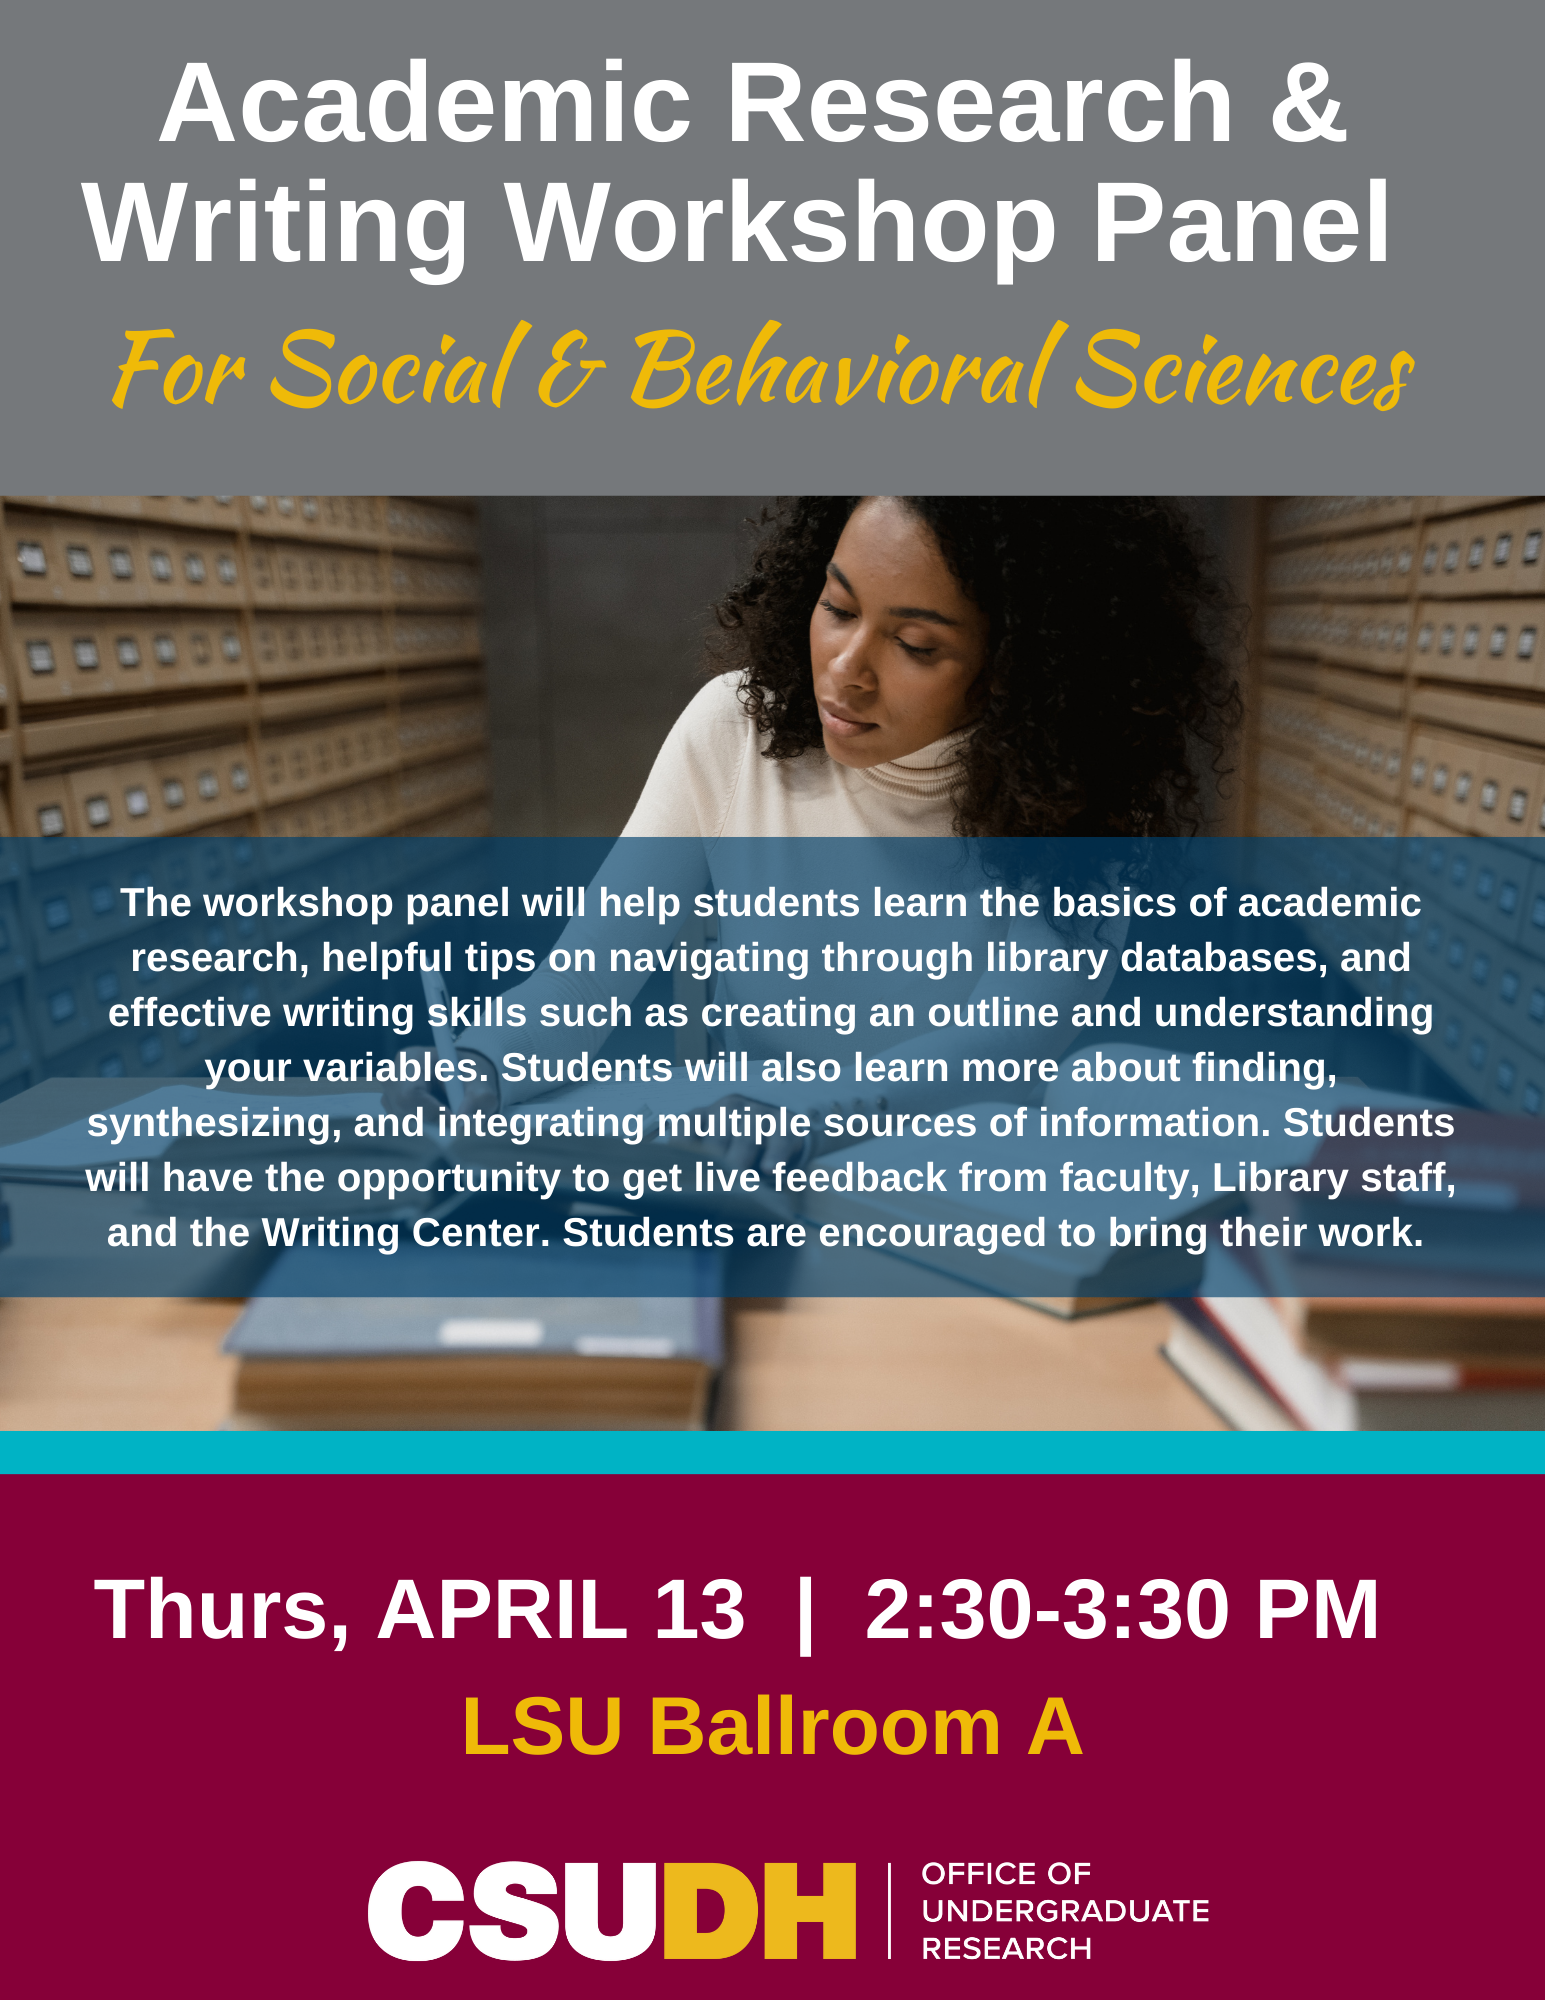 Academic-Research-Writing-Workshop-Panel-Flyer-4-13-23